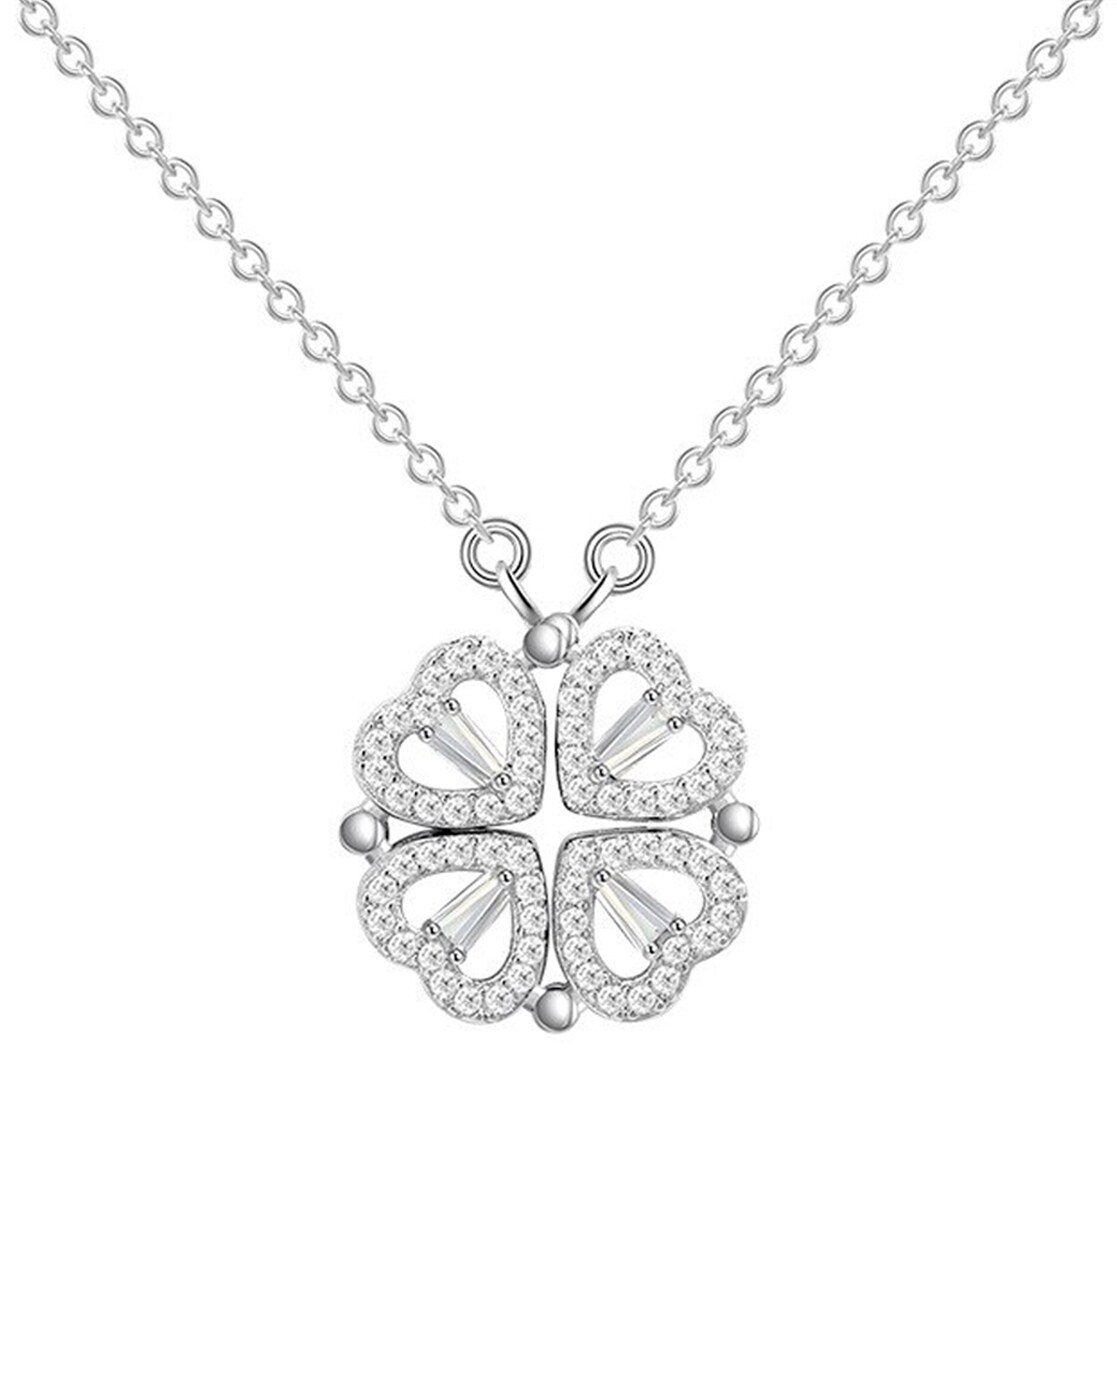 Amara 2 in 1 Heart Clover Necklace | The Afterglow Label